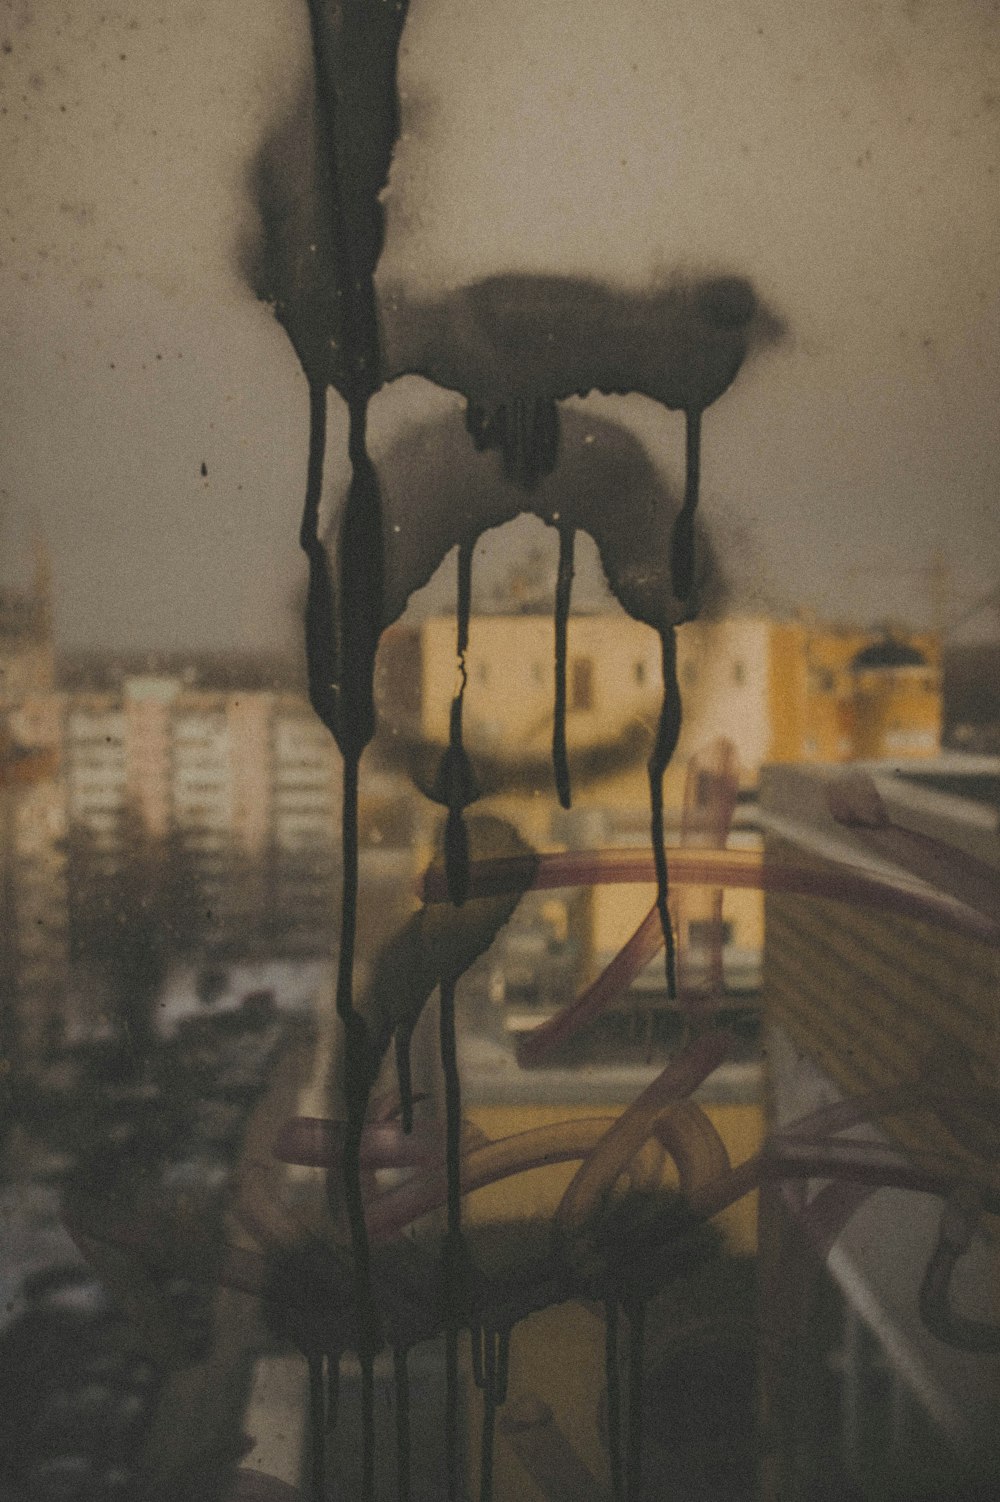 a view of a city from a window covered in icing